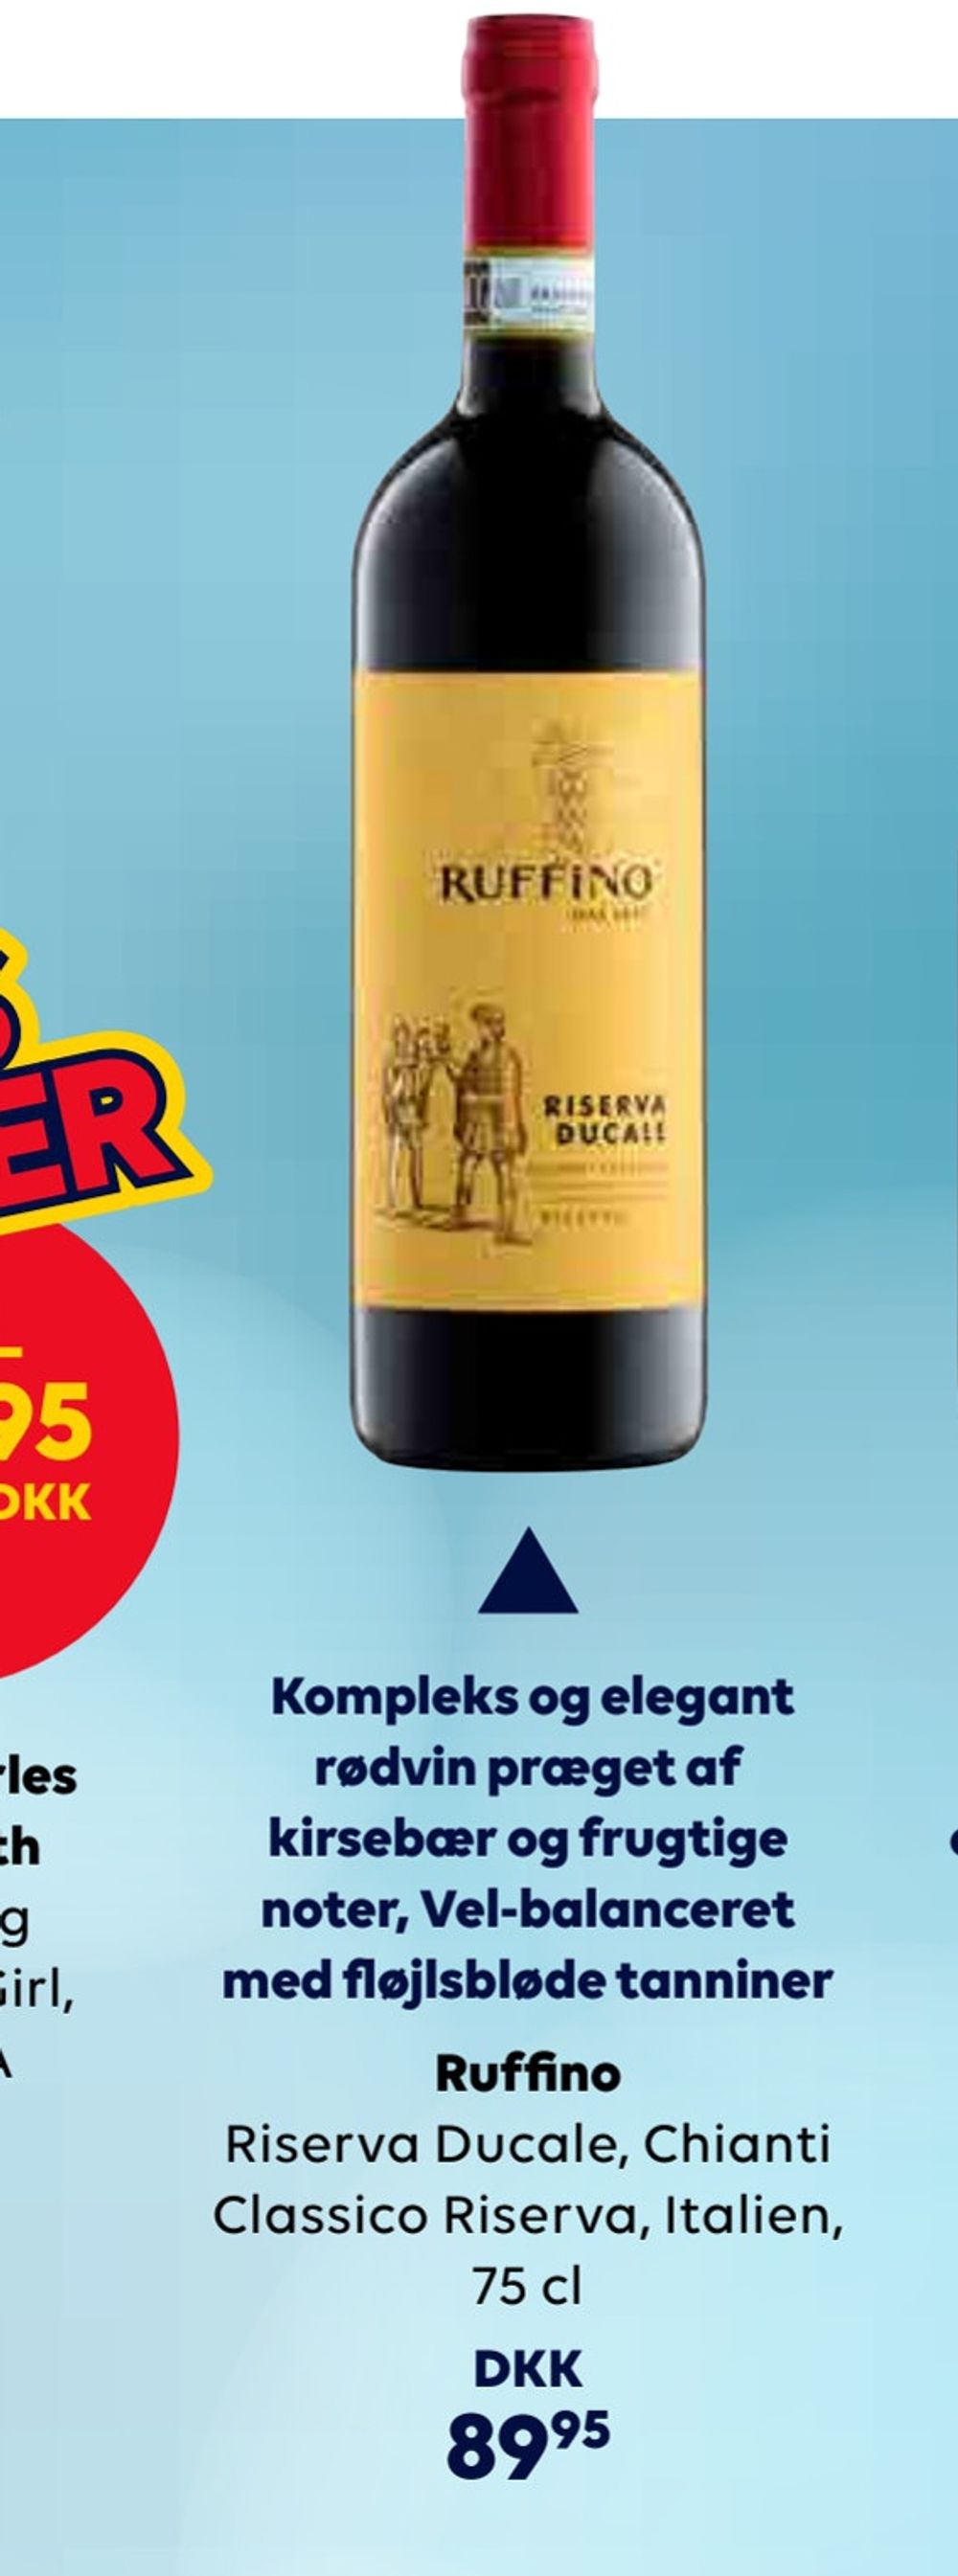 Deals on Ruffino from BorderShop at 89,95 kr.